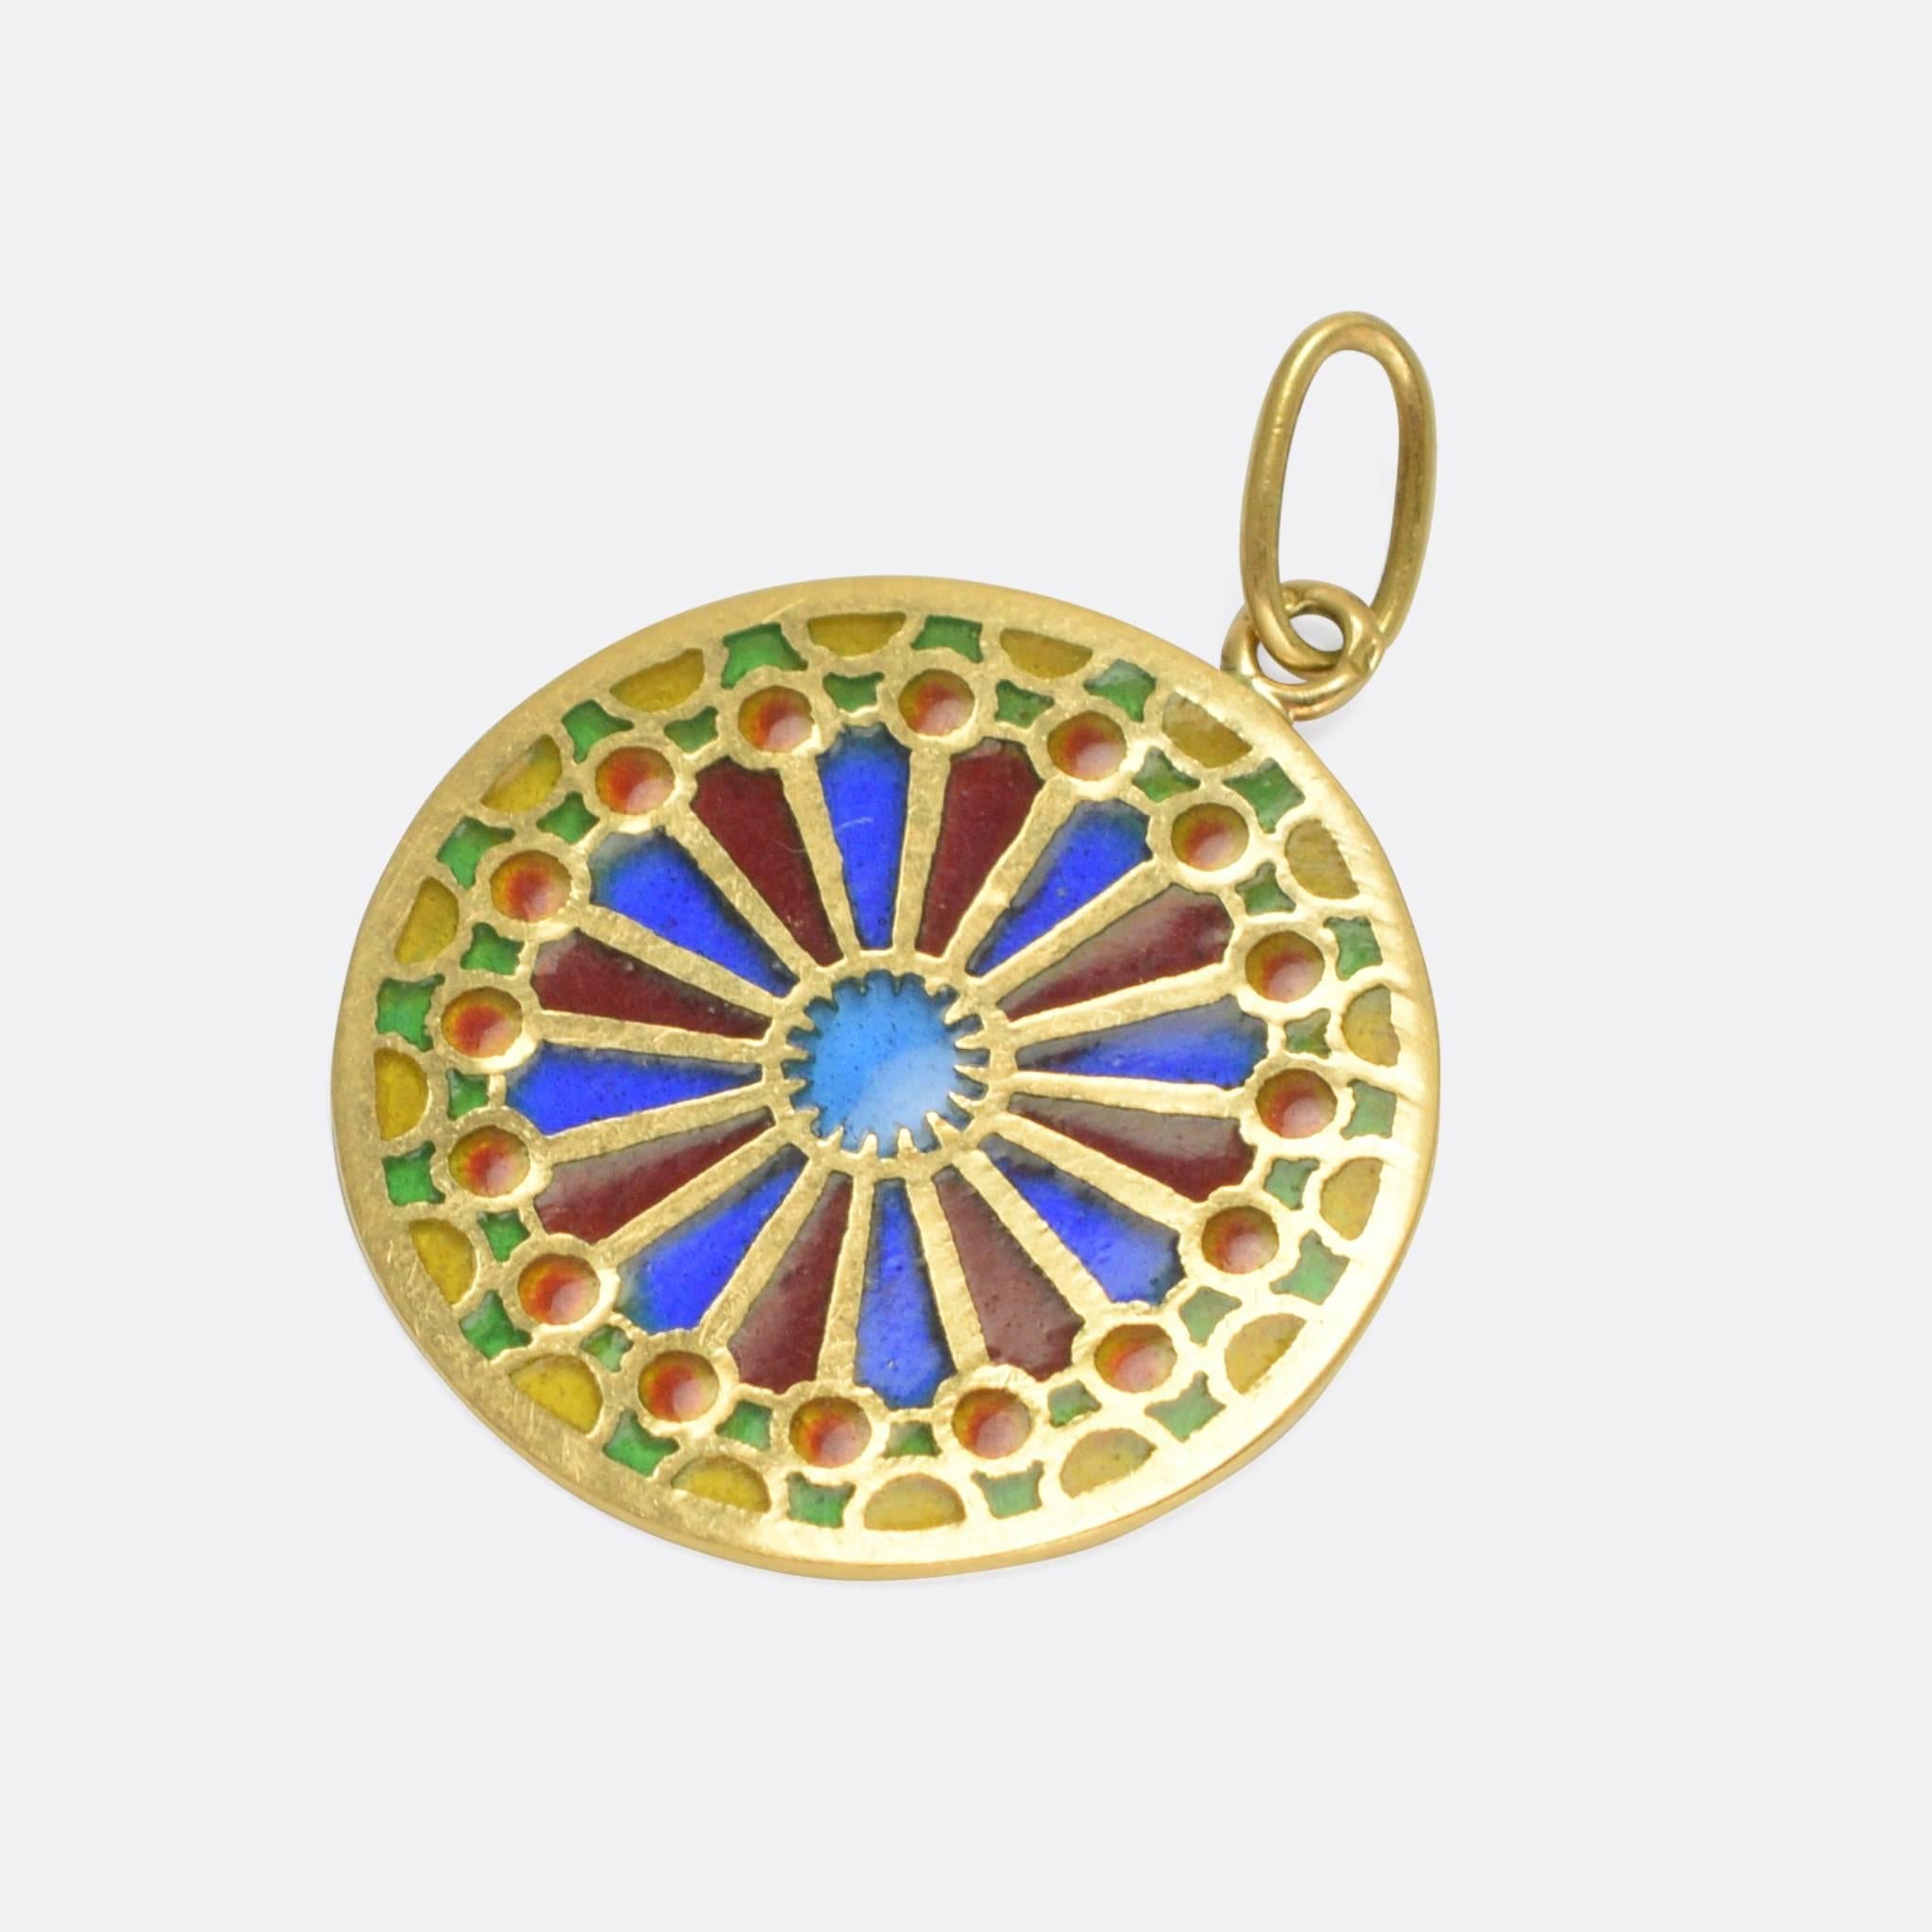 This beautiful antique pendant is finished in colourful plique-à-jour enamel. It has been modelled after the North Rose Window at Notre Dame Cathedral in Paris, and is fashioned in 18k yellow gold.

The term plique-à-jour literally translates into